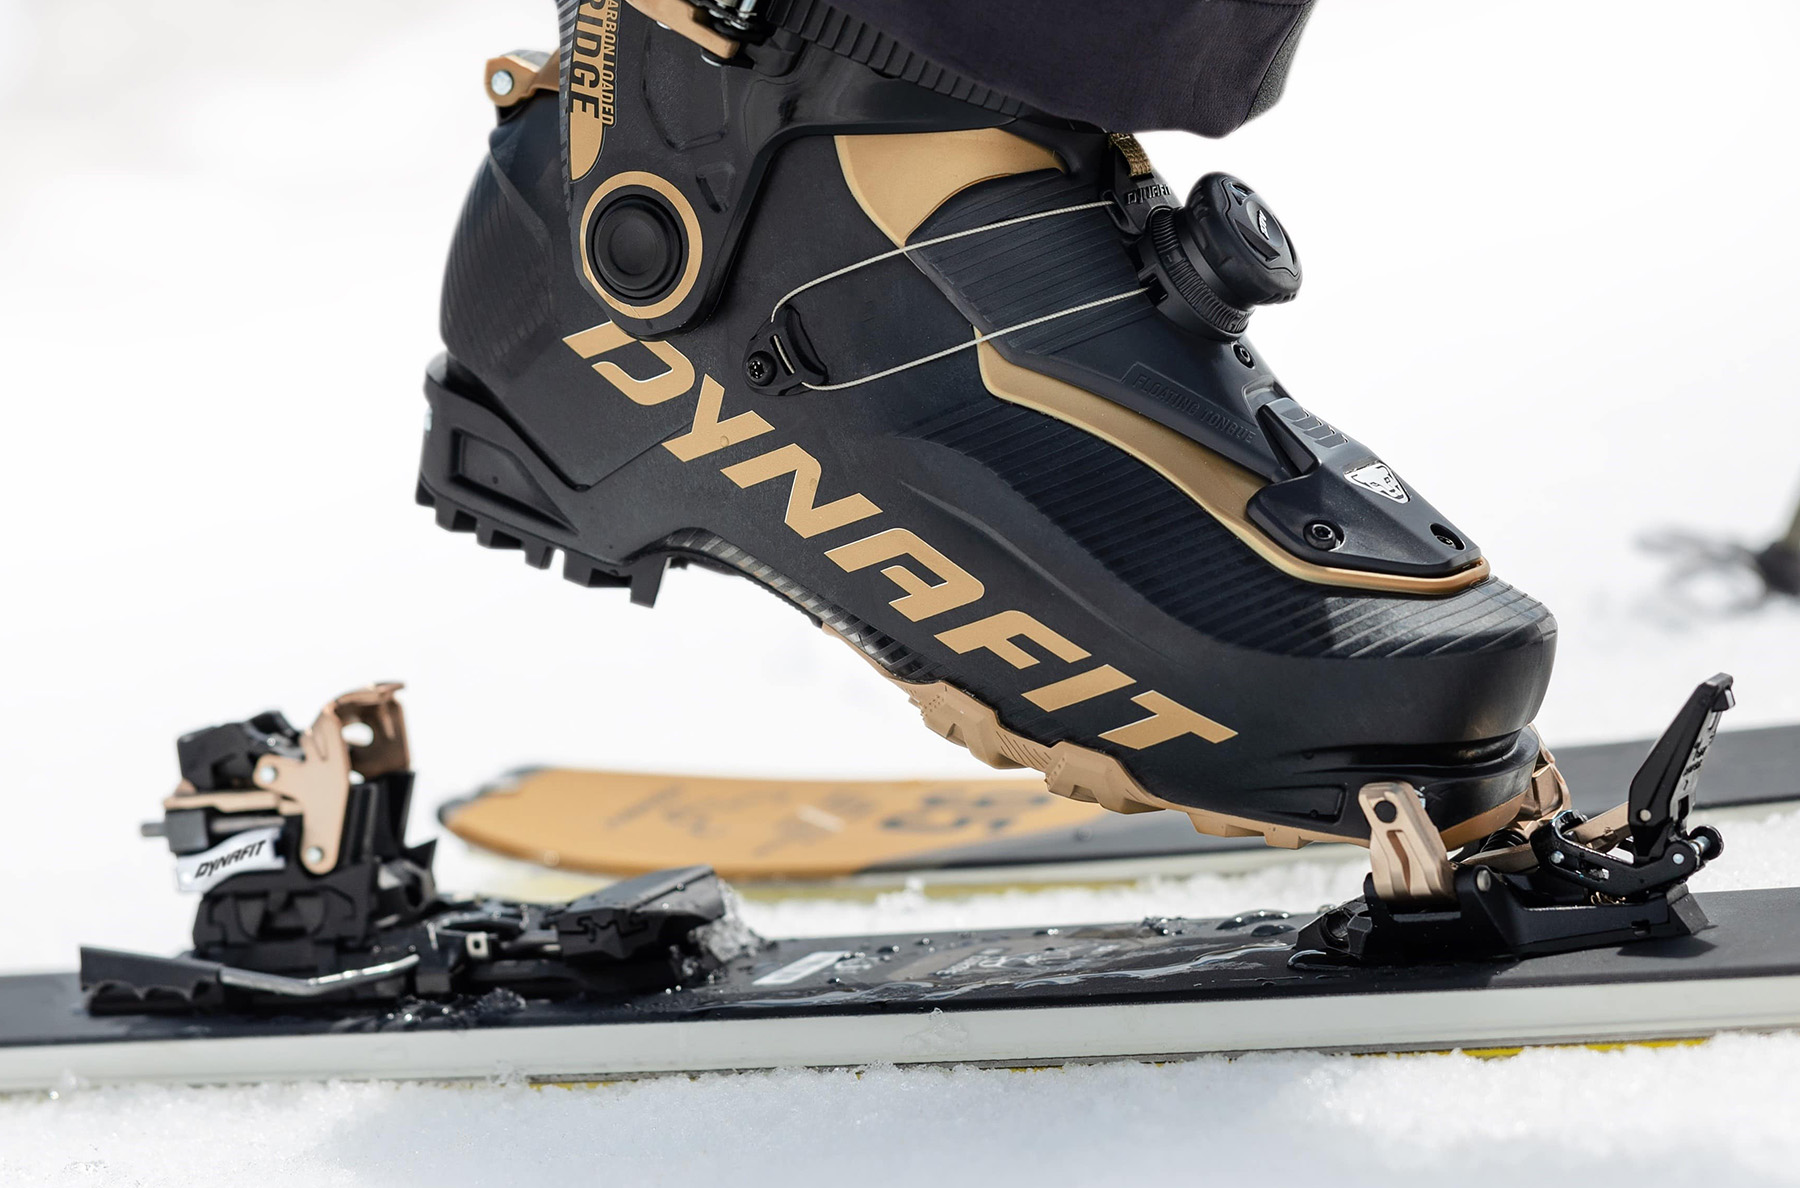 Dynafit announces new Ridge ski touring binding | BLISTER discusses the details of the new binding